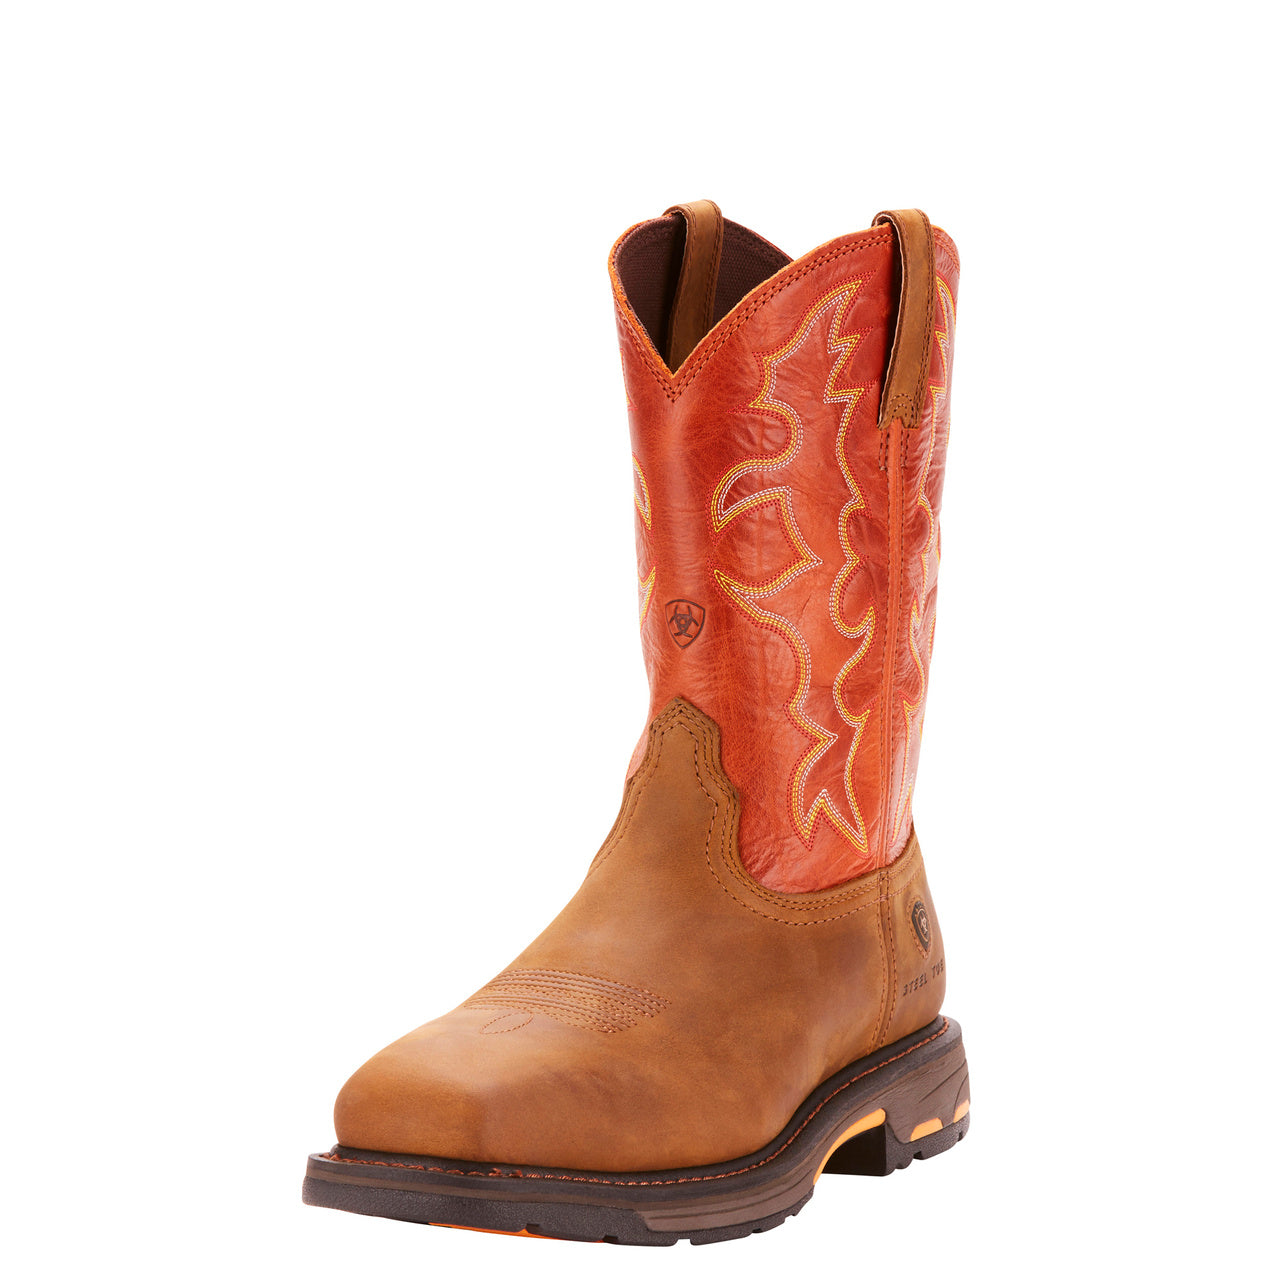 Ariat Workhog Wide Square Toe Boot 8.5 EE